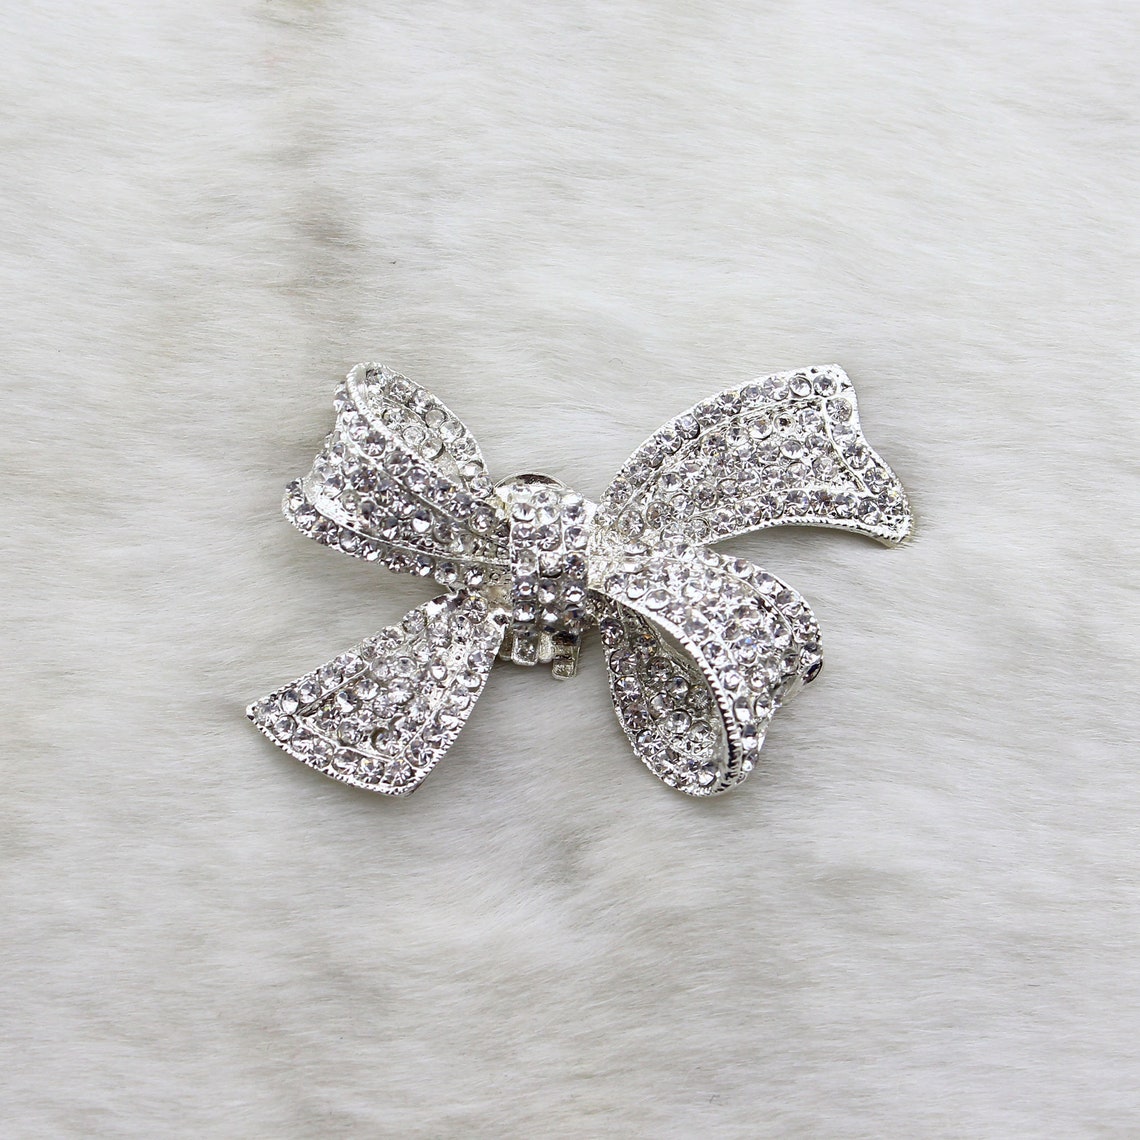 6.5x4.5cm Bowknot Diamonds Clips for Shoes clip-on - Etsy